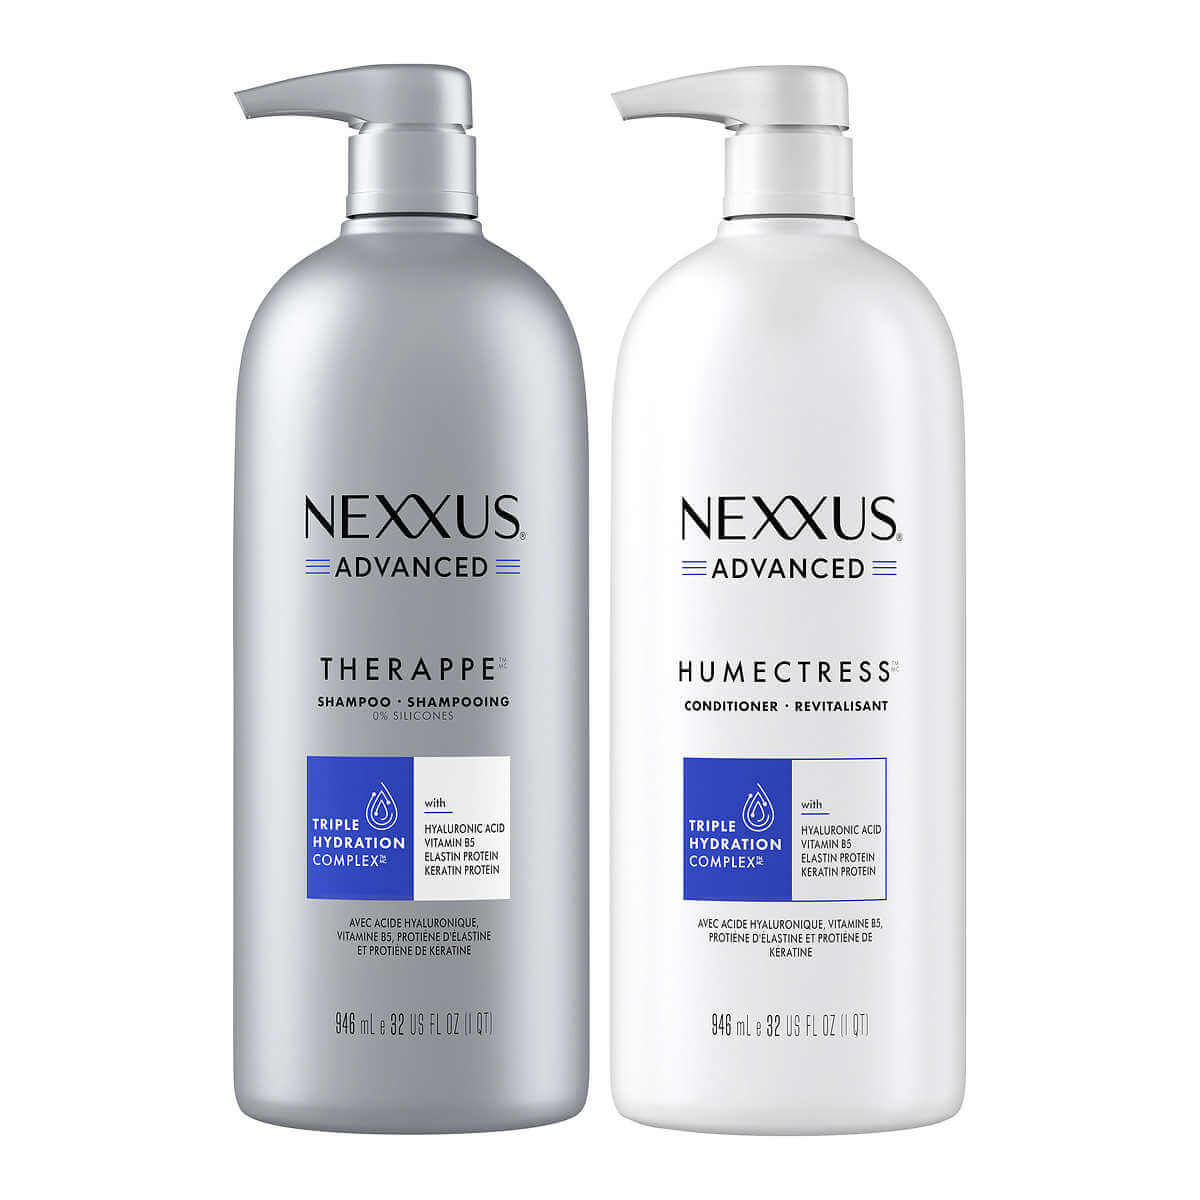 nexxus-advanced-therappe-shampoo-and-humectress-conditioner-32-fl-oz-2-count_3